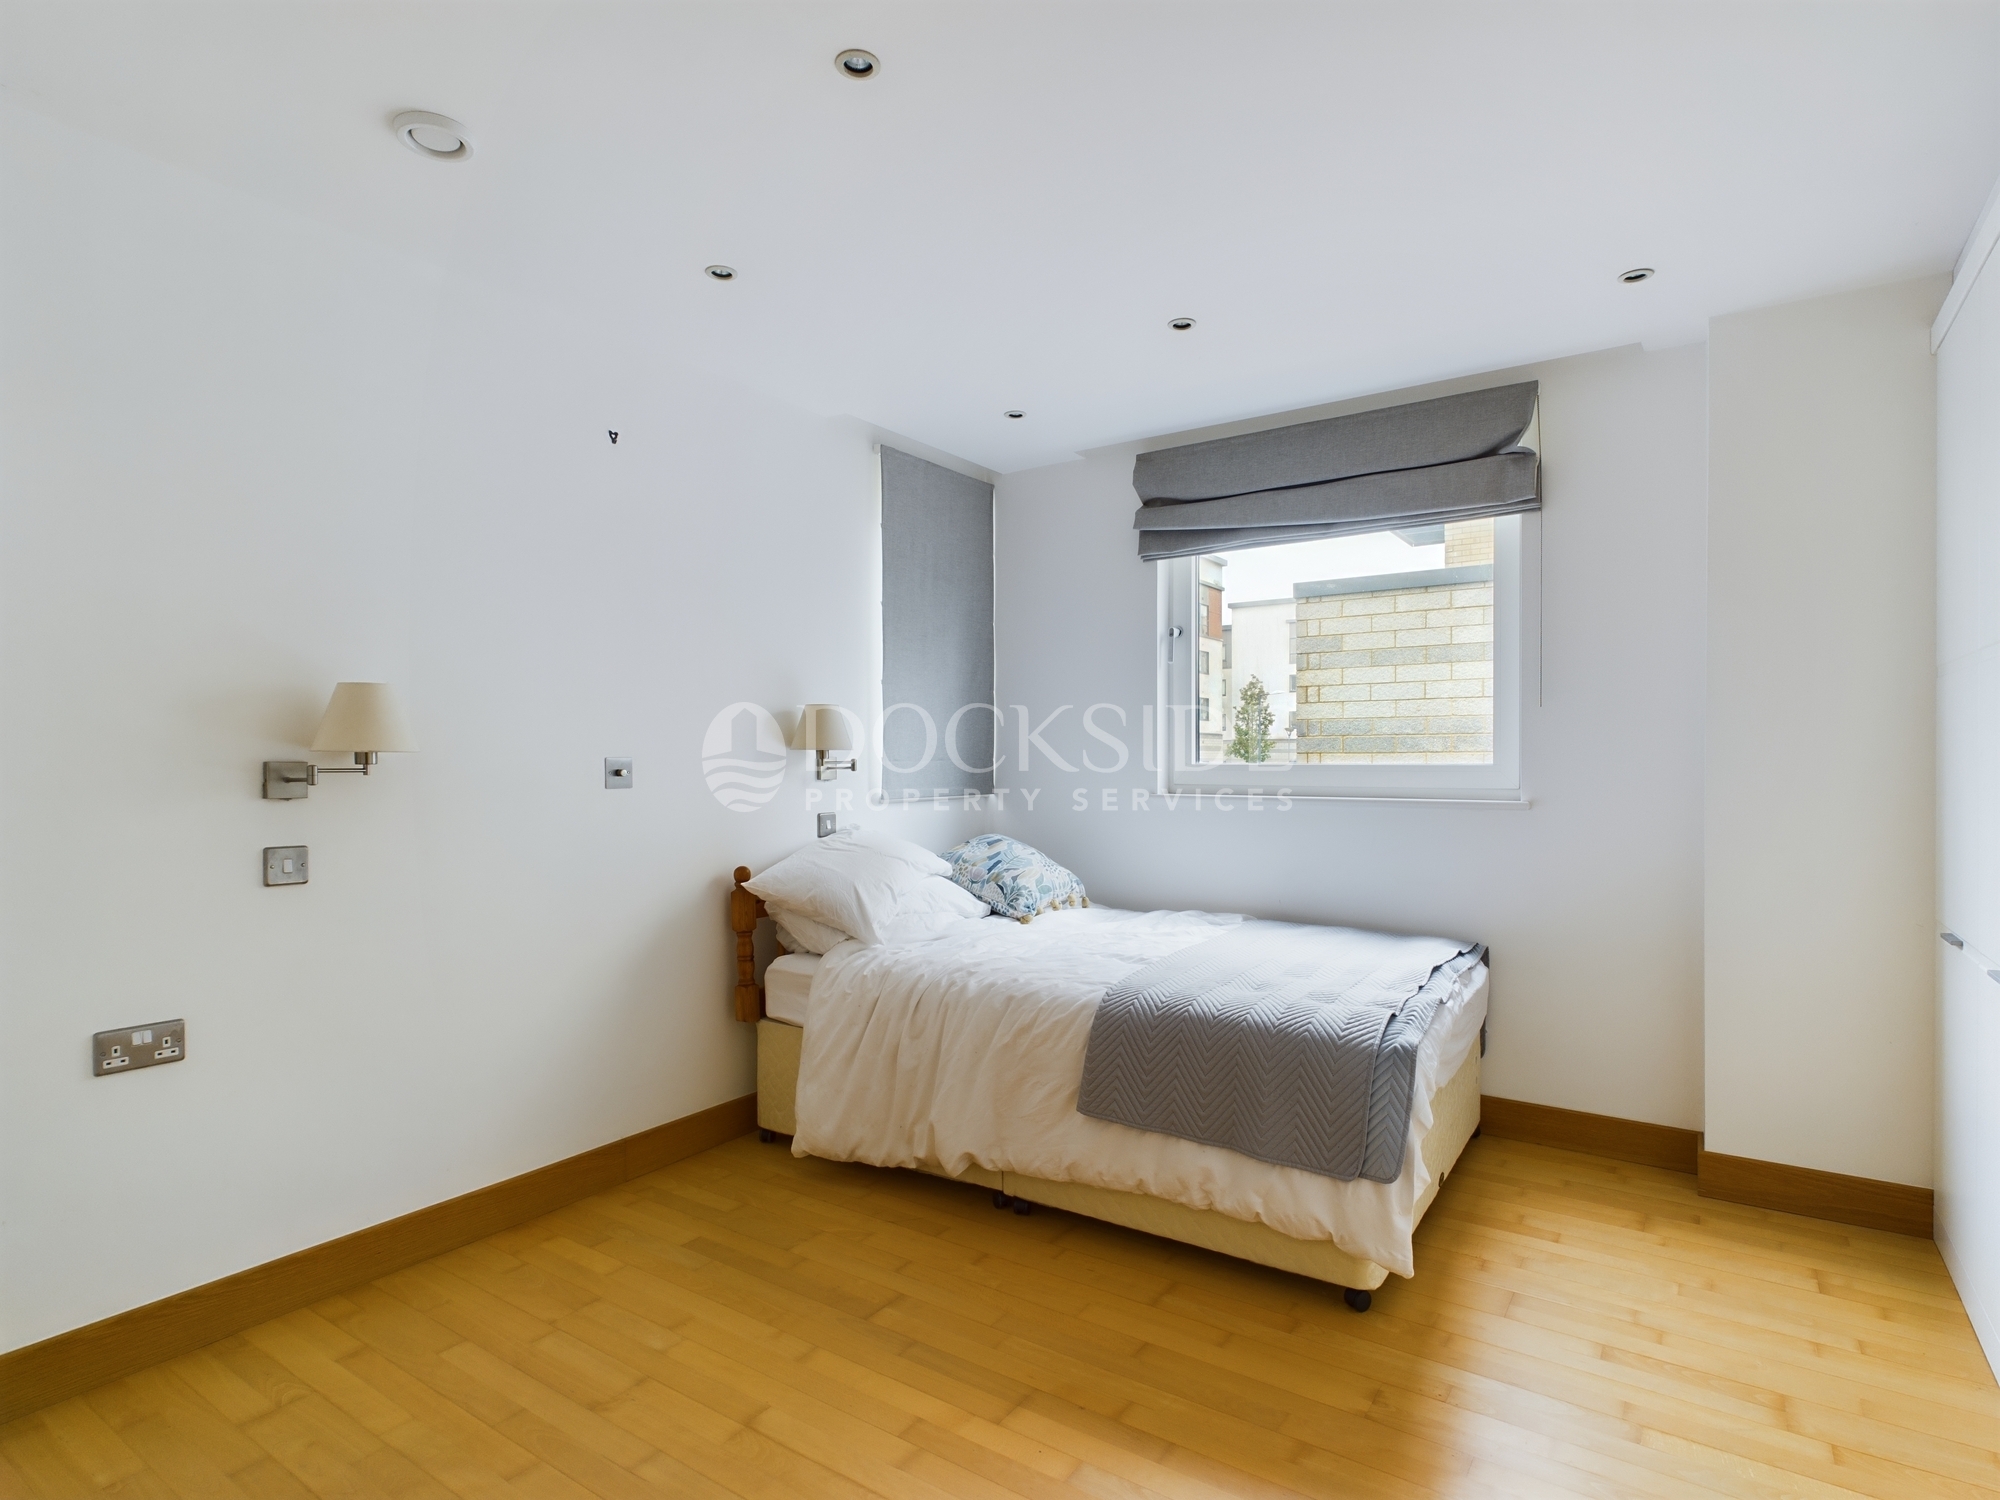 4 bed to rent in Pier Road, Gillingham  - Property Image 9